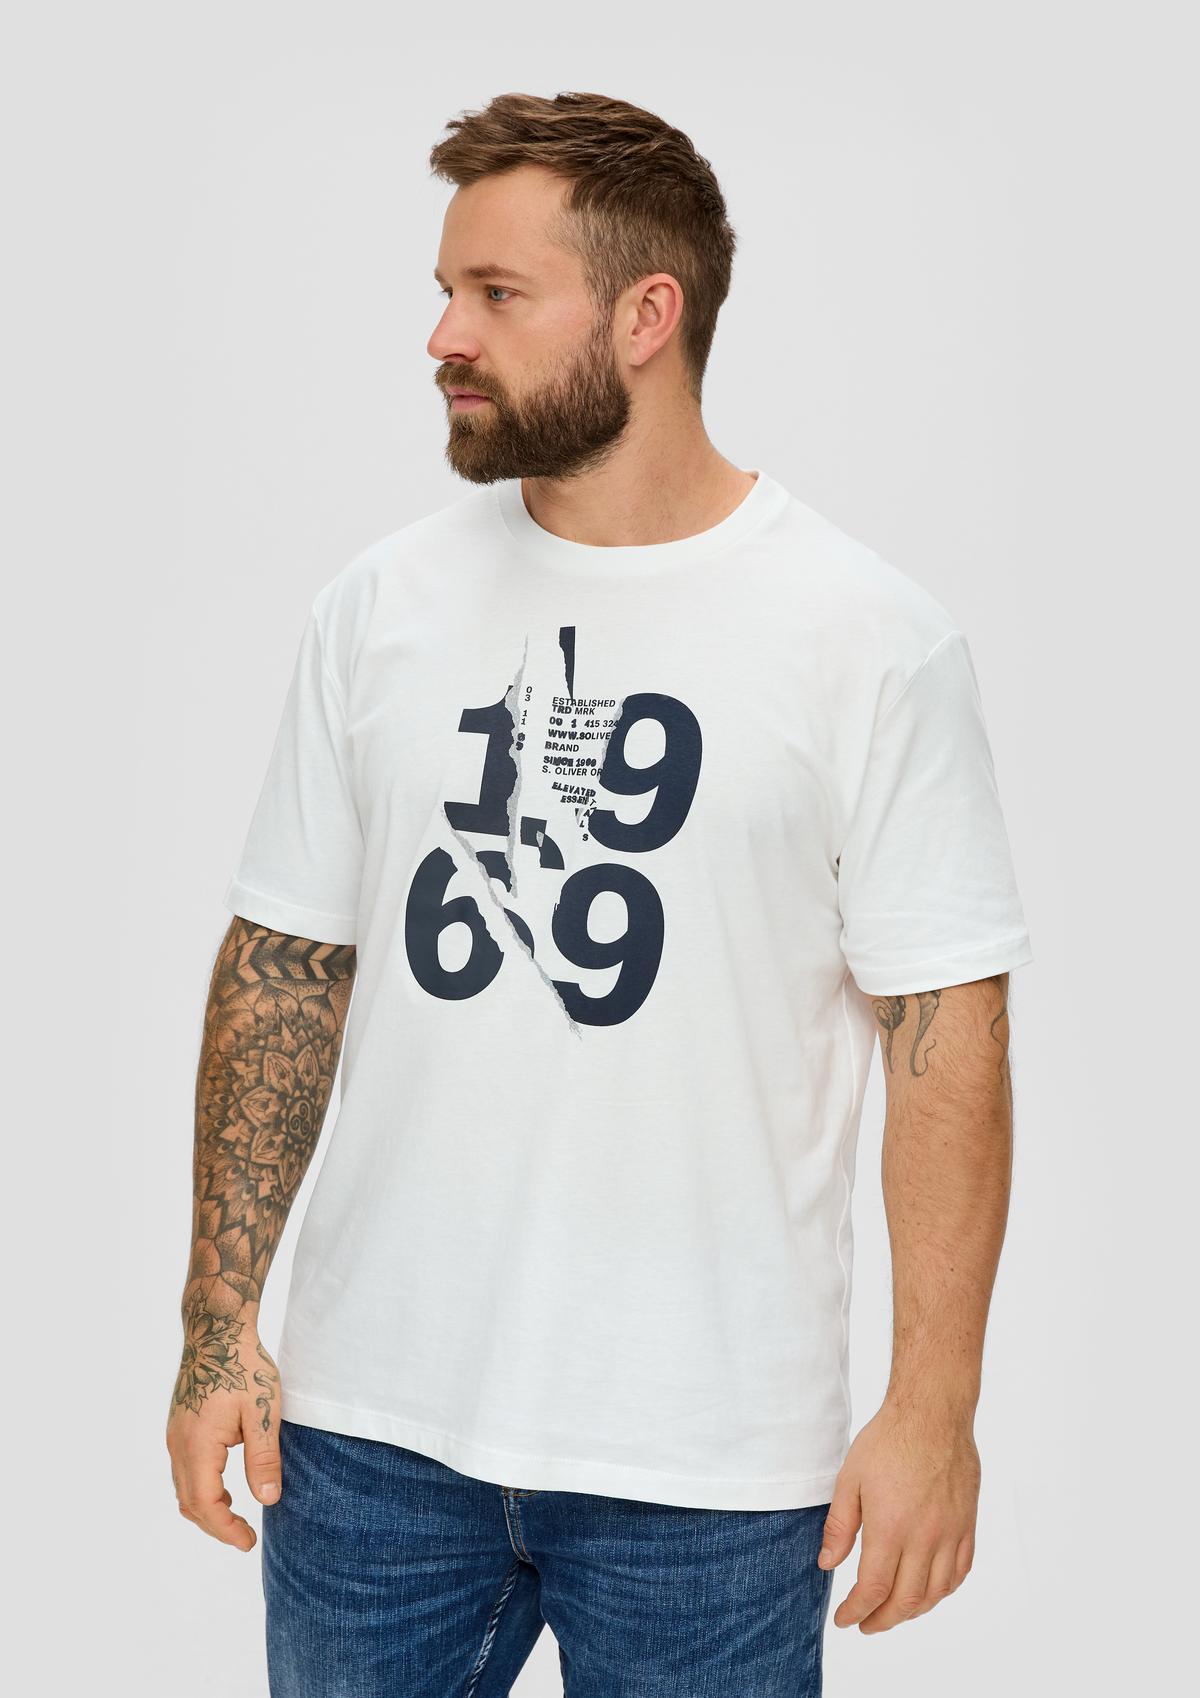 with front a T-shirt white print -